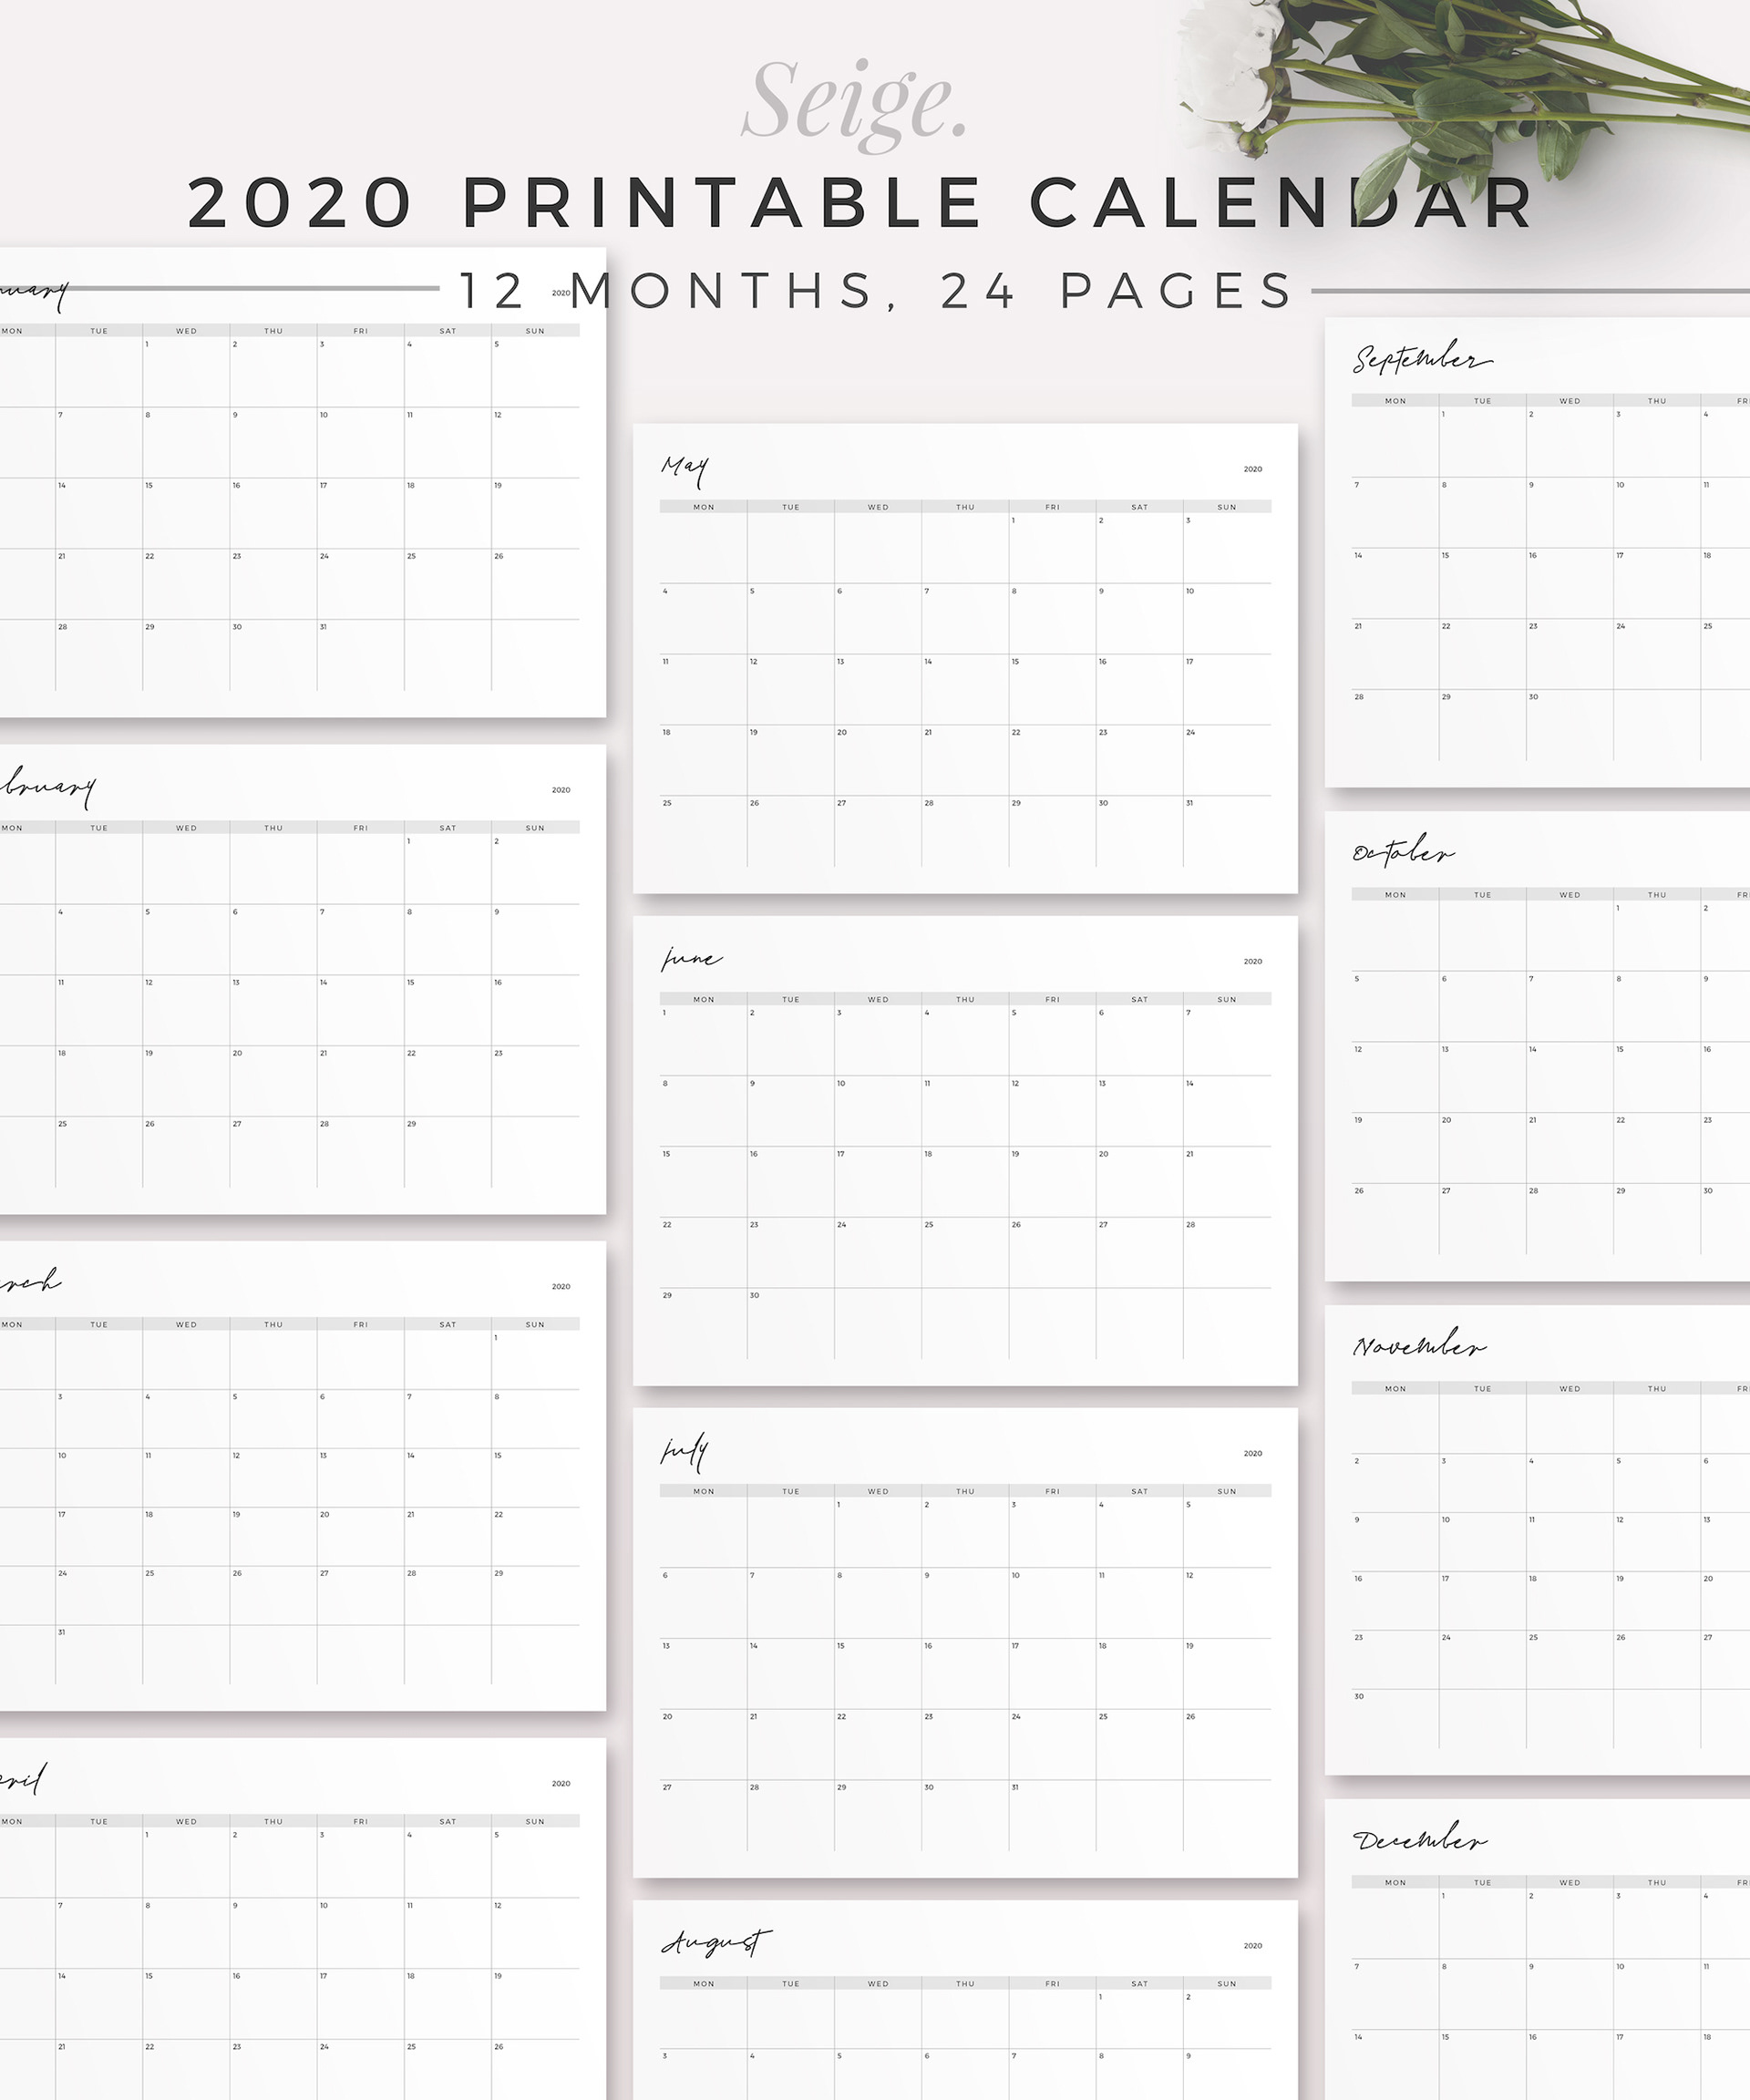 Paperly Planners - Beautiful, Productive. - SEIGE 2020 Calendar